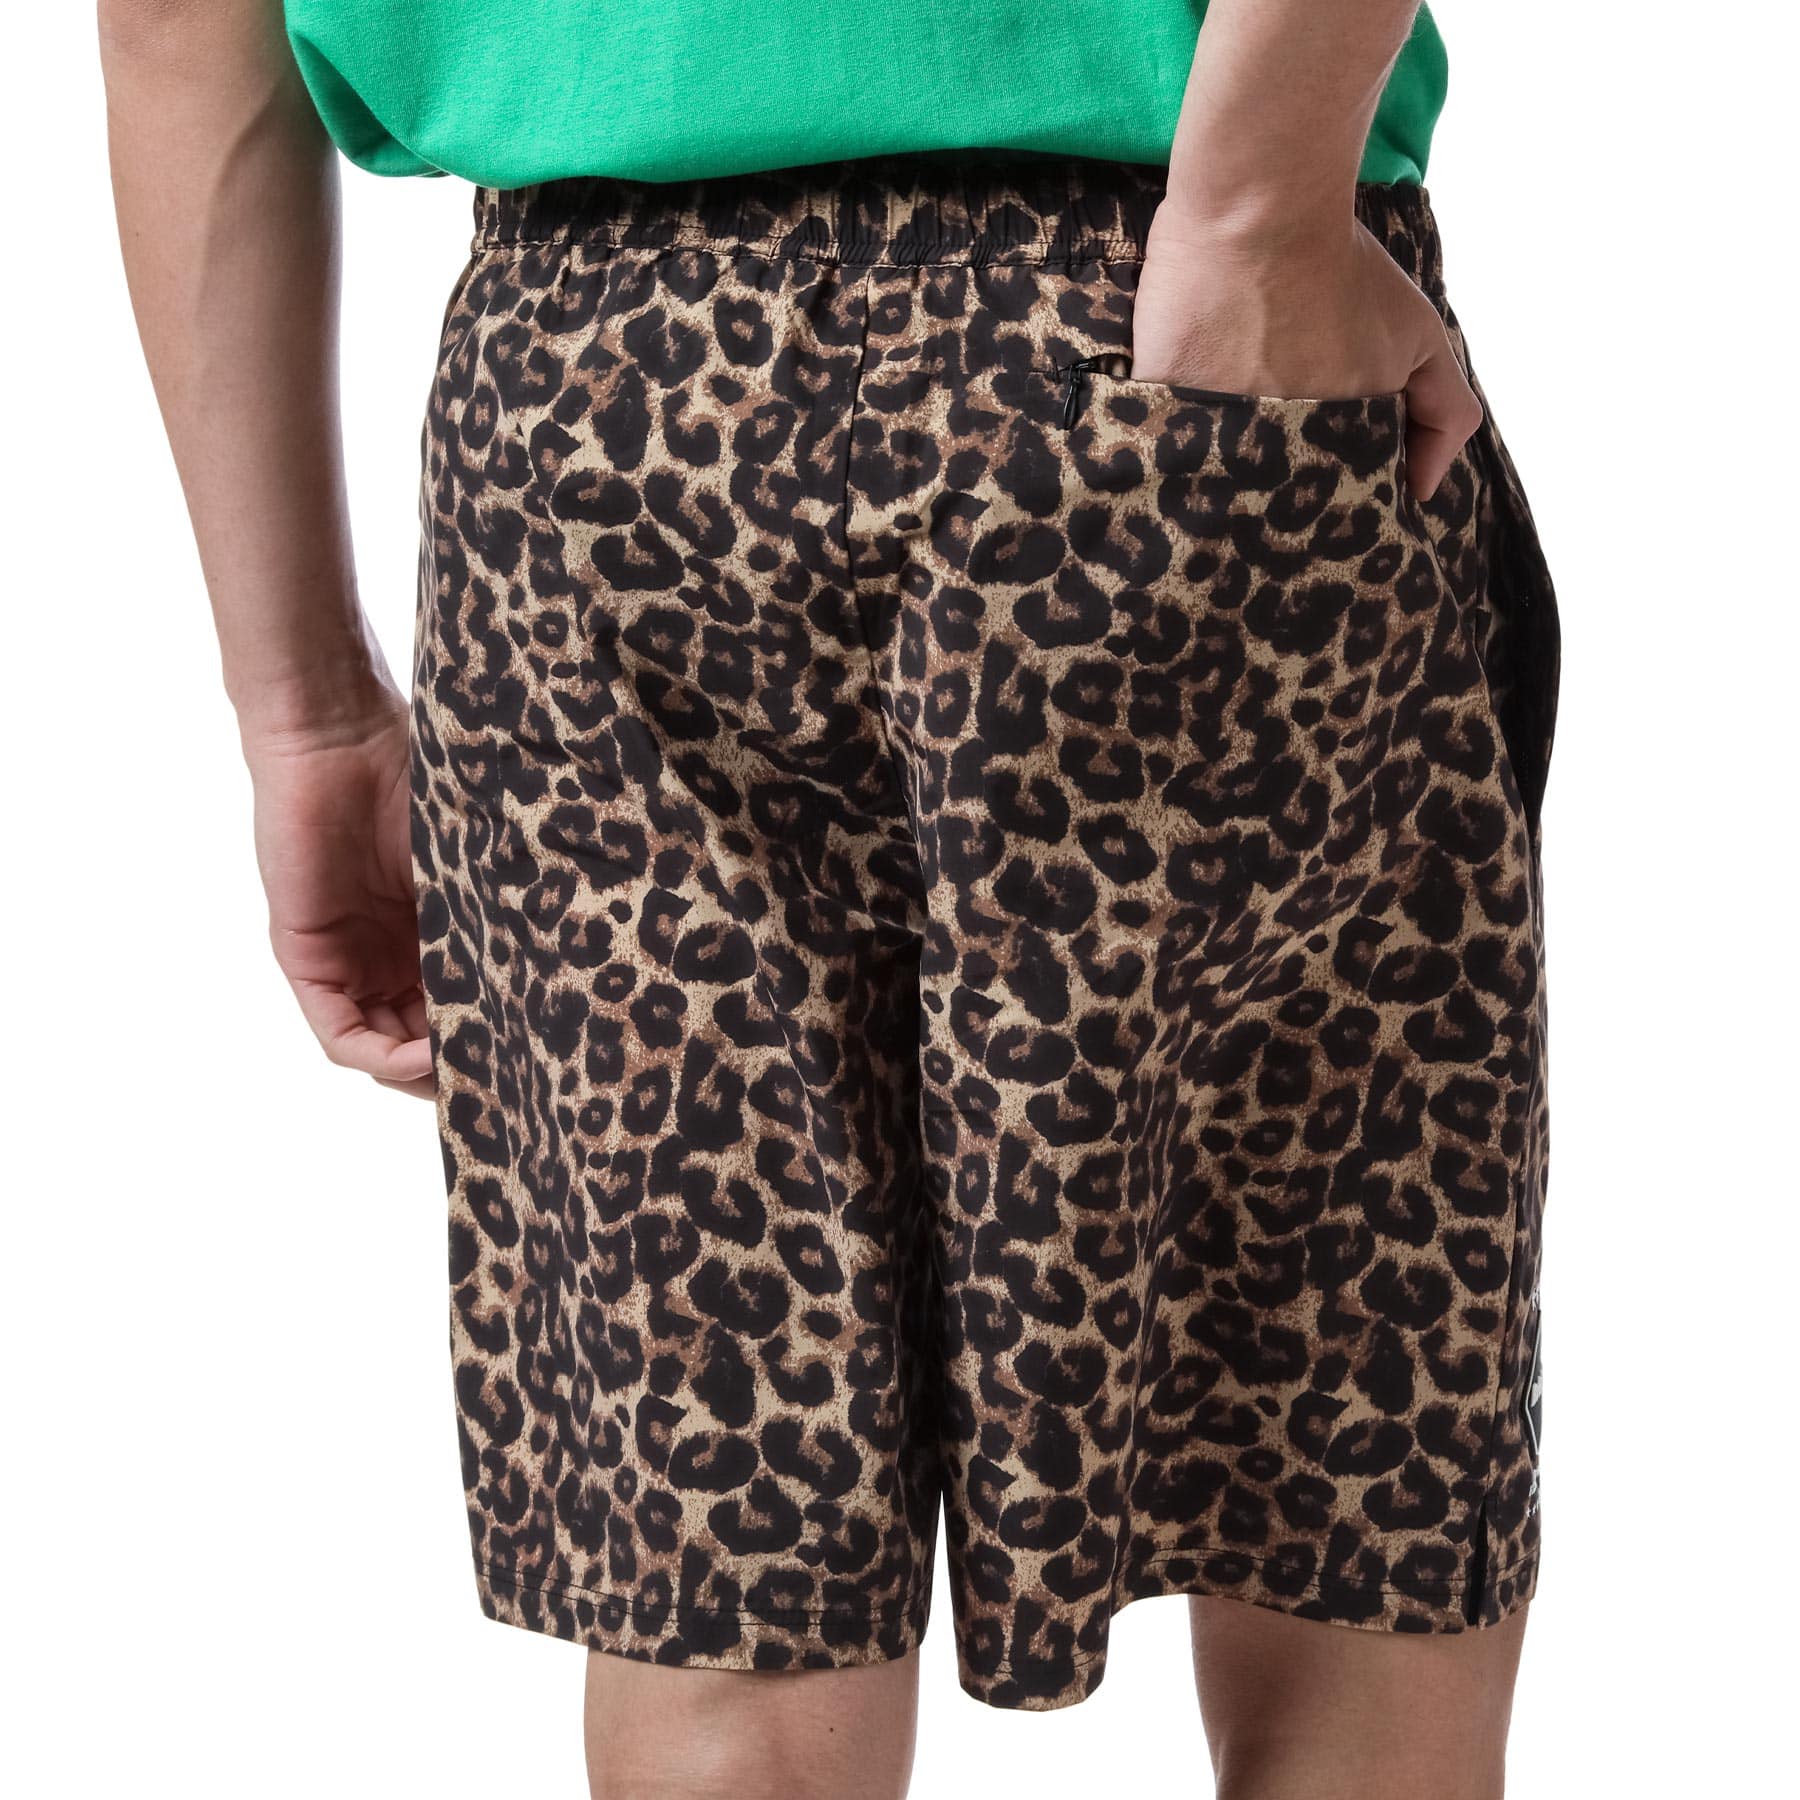 FCRB 22SS PRACTICE SHORTS BROWN LEOPARD - ショートパンツ